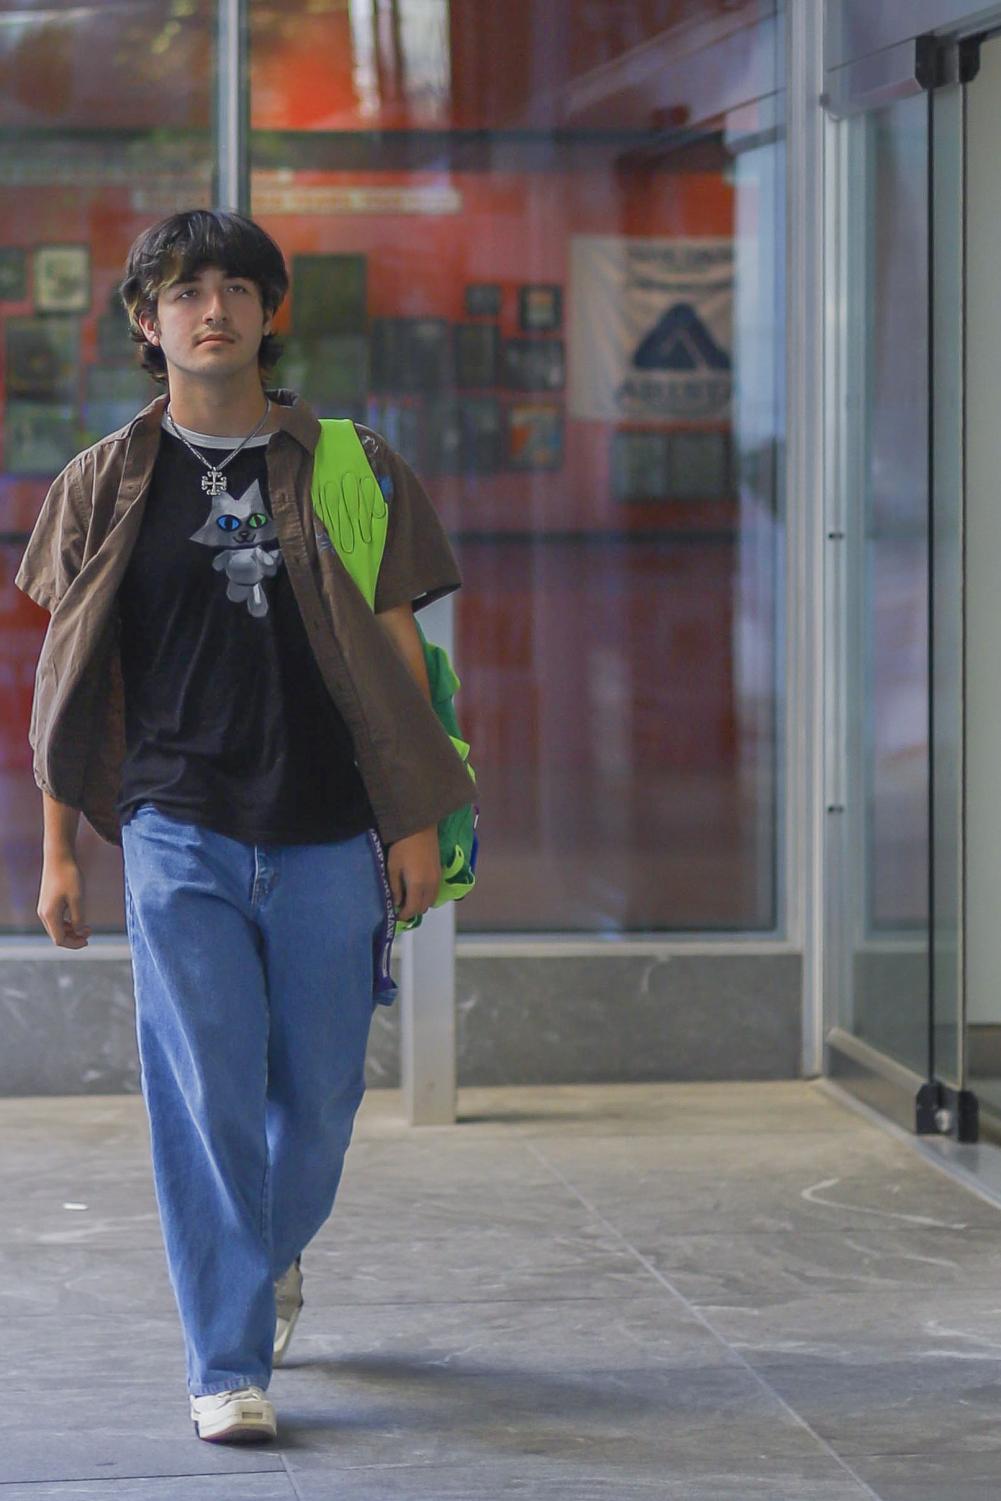 Matthew Toups walks outside of a Tandon building wearing a black graphic t-shirt, brown dress shirt, baggy blue jeans and a green backpack.